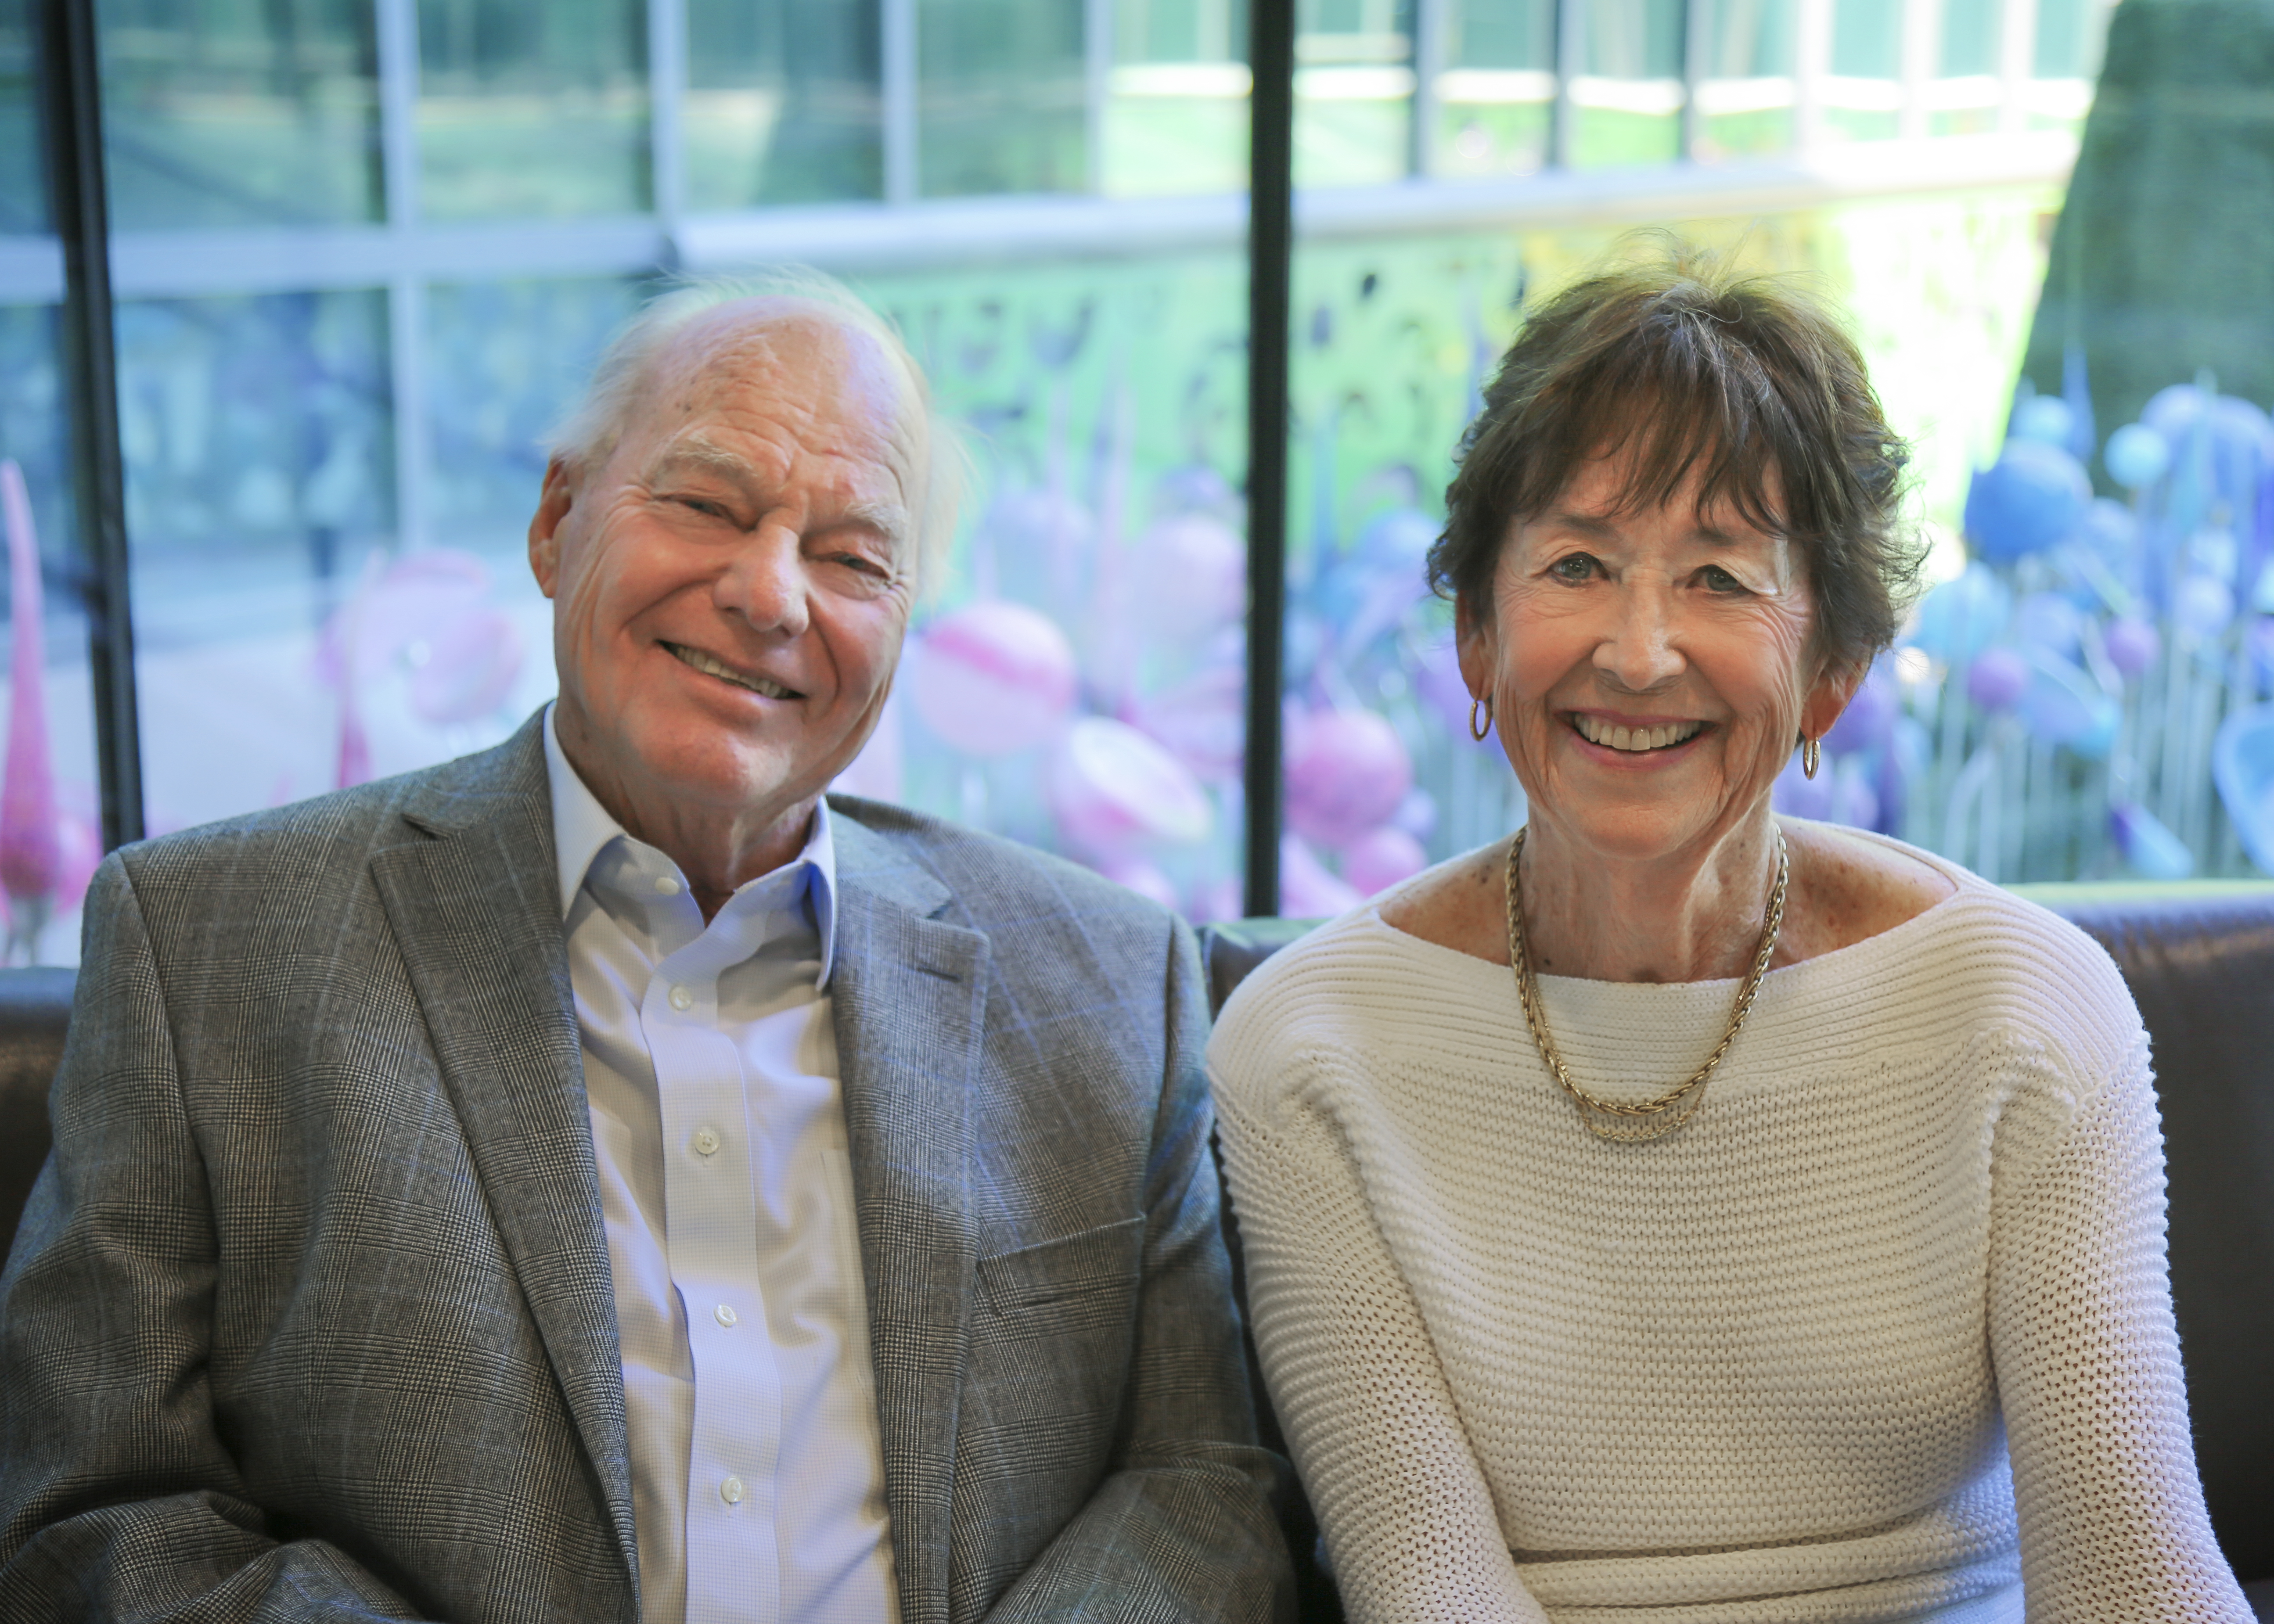 The Taylor family’s philanthropy drives big and bold ideas in multiple myeloma research